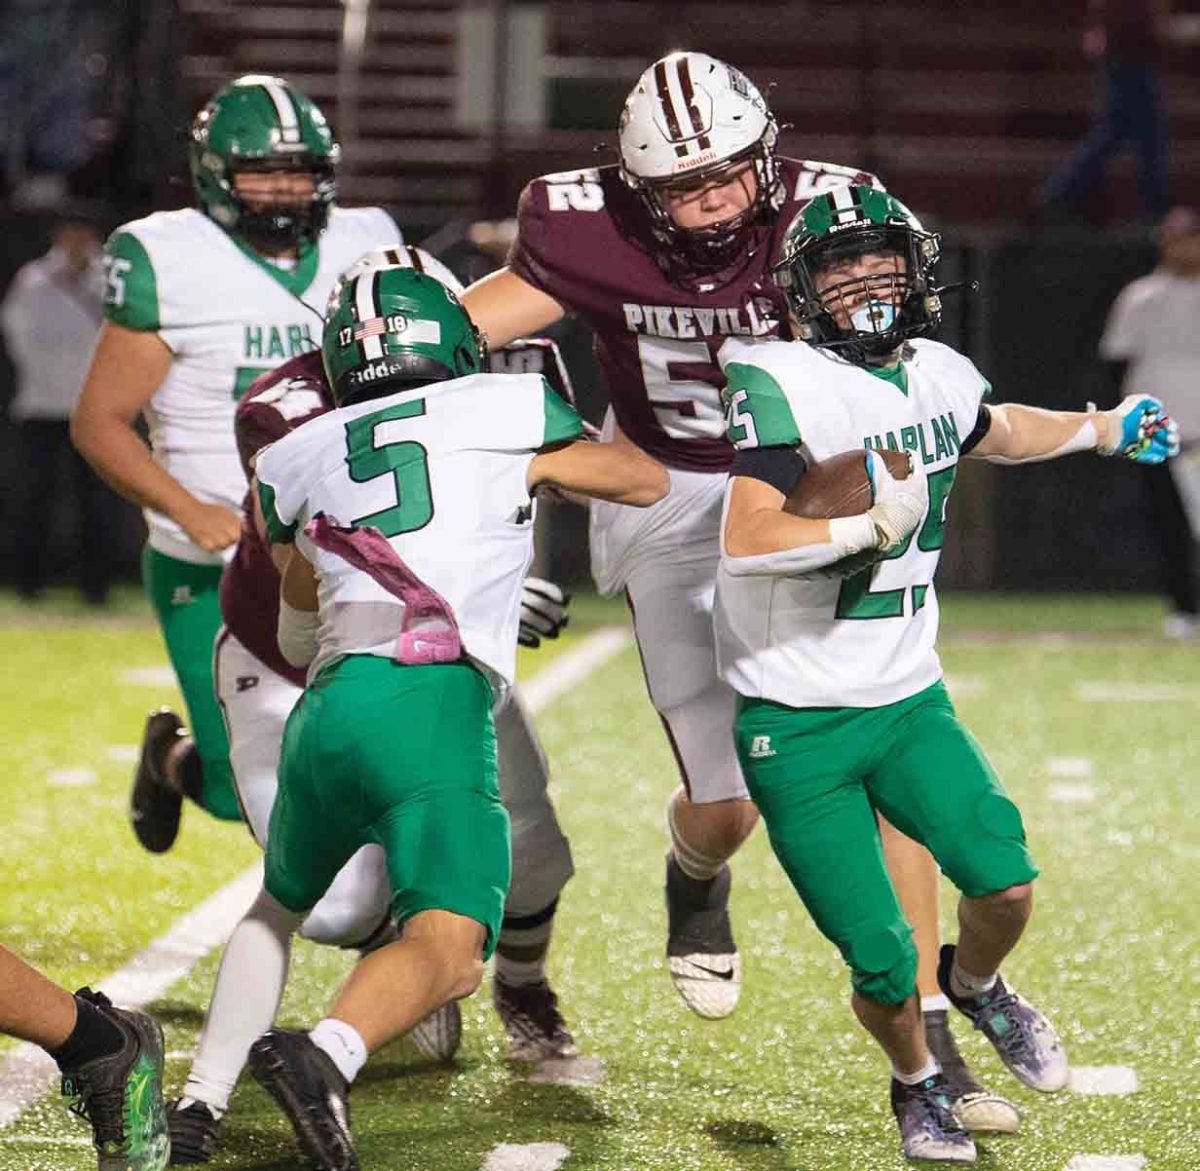 Harlan running back Jonah Sharp followed a block from Brayden Doan in playoff action Friday at Pikeville. The Panthers moved on to the second round with a 49-6 win.